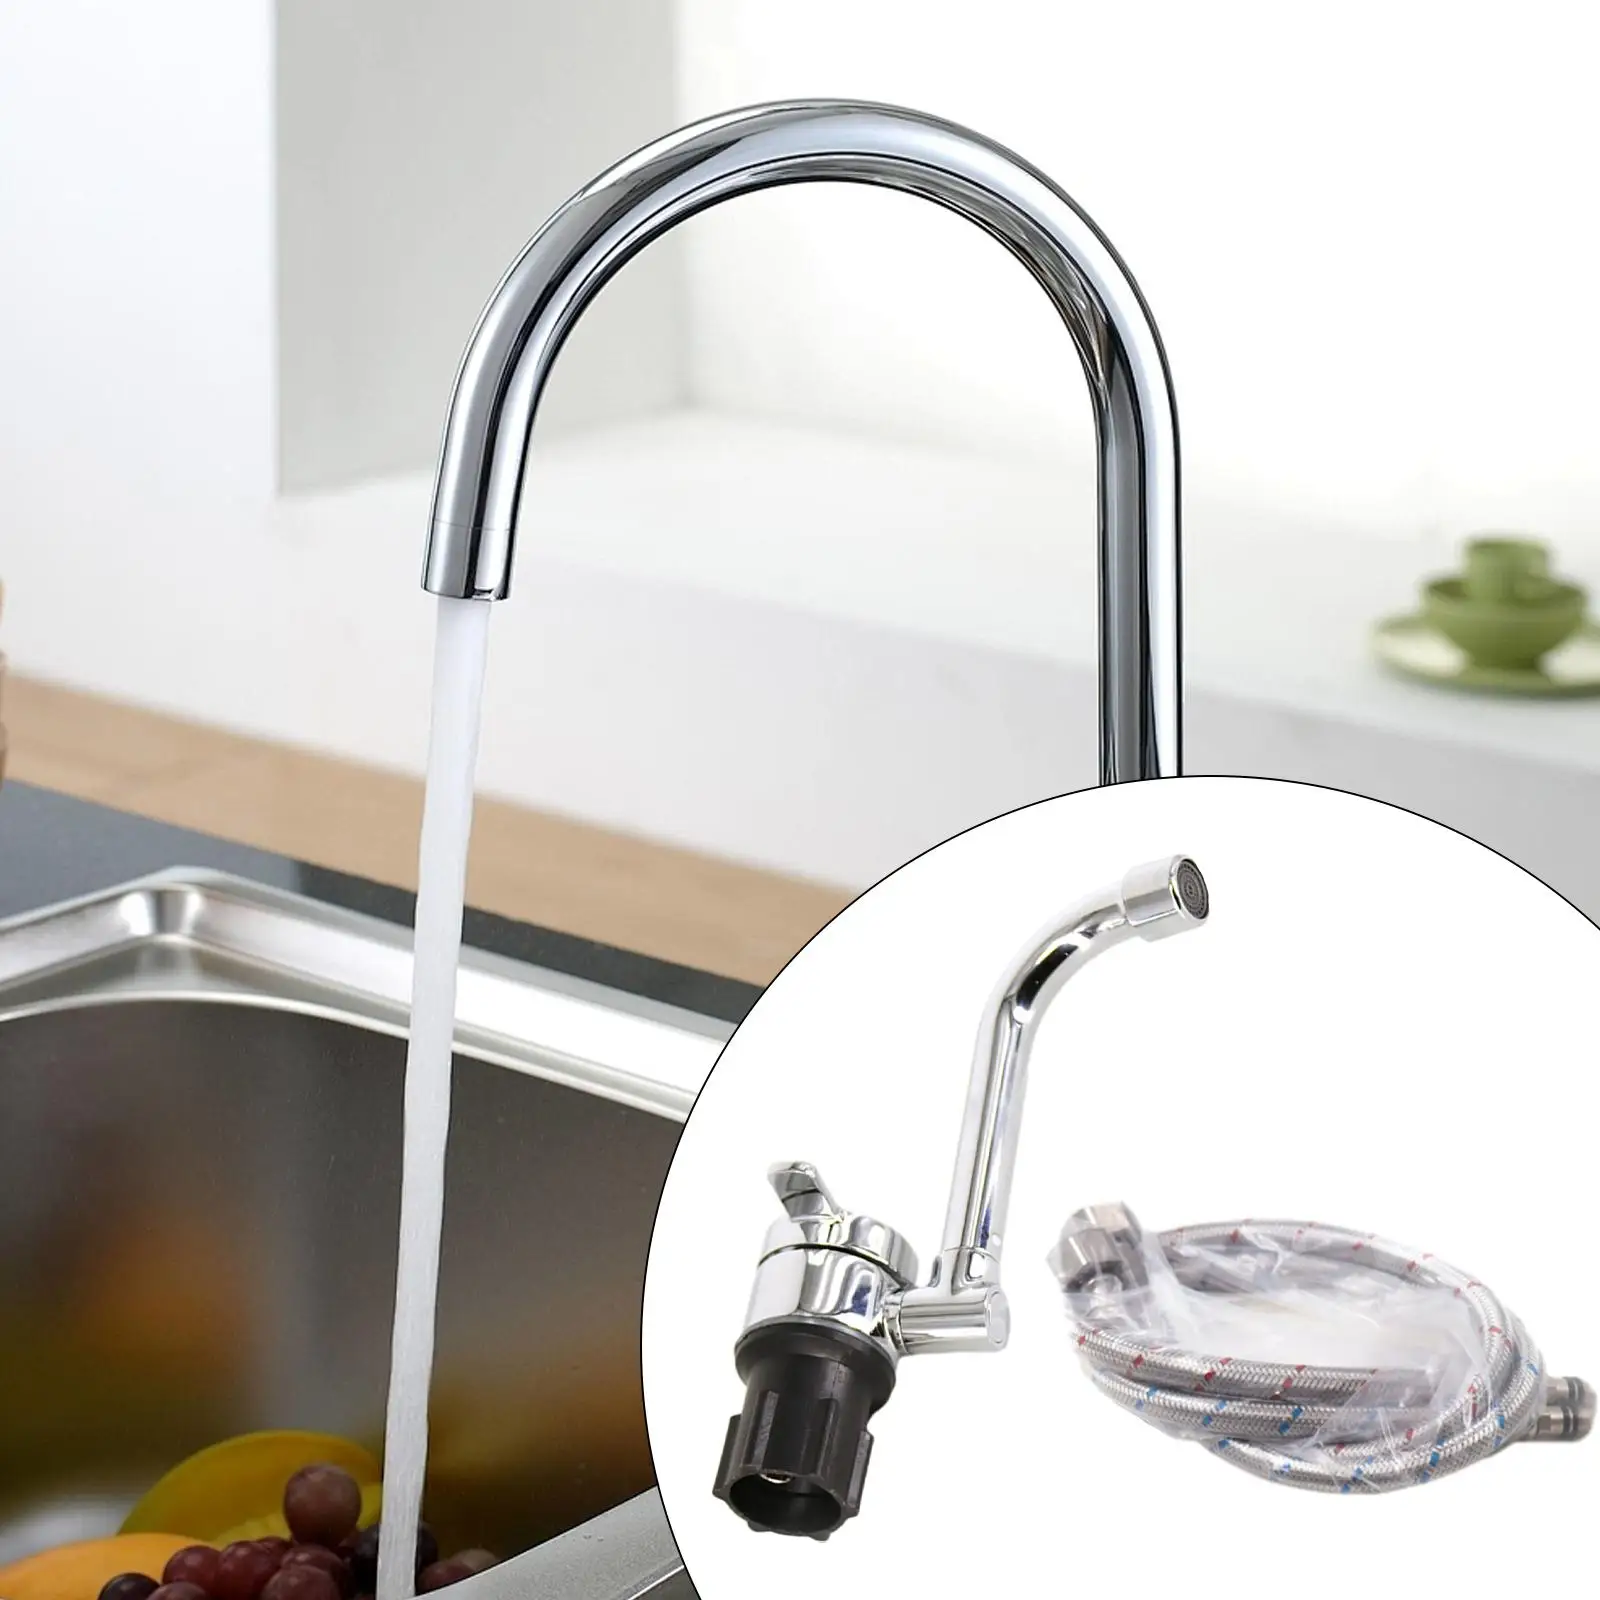 RV Faucet Hot and Cold Stainless Steel Camper Faucet for Caravans Marine